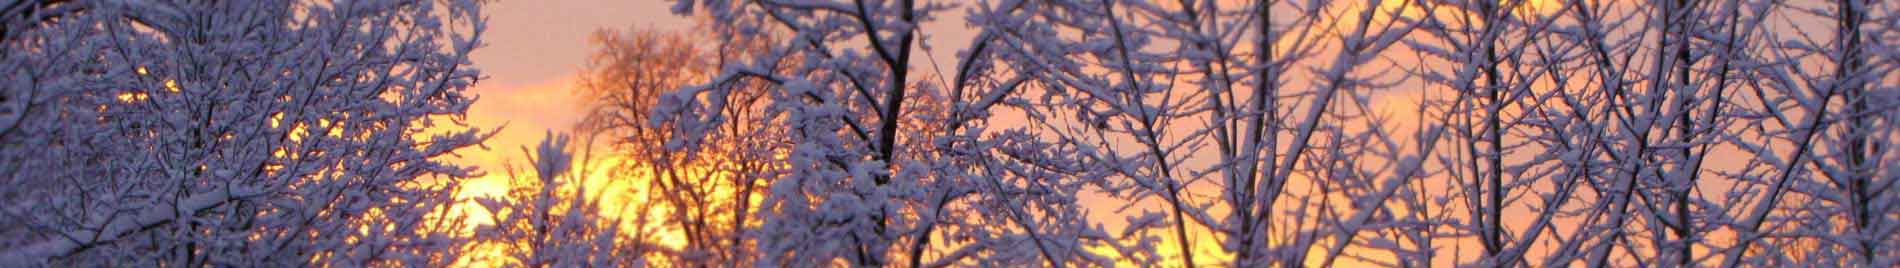 Snowy trees in a sunset